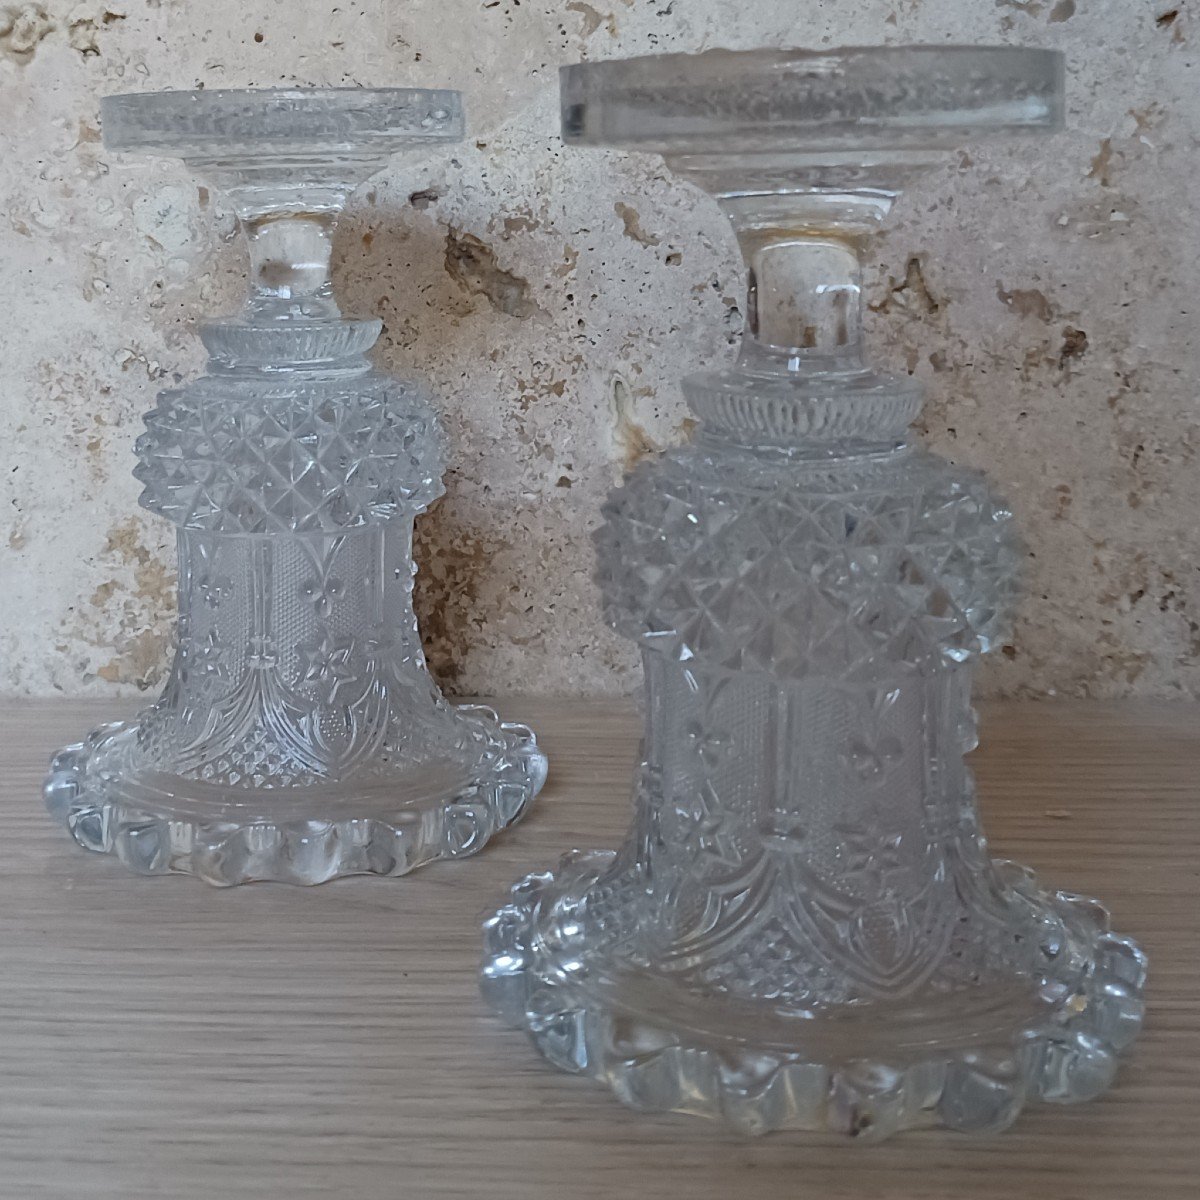 Manufacture Du Creusot Or Baccarat - Rare Pair Of Crystal Medicis Vases With Violets - Restoration Period, Louis Philippe - Troubadour, Neo-gothic Style-photo-3